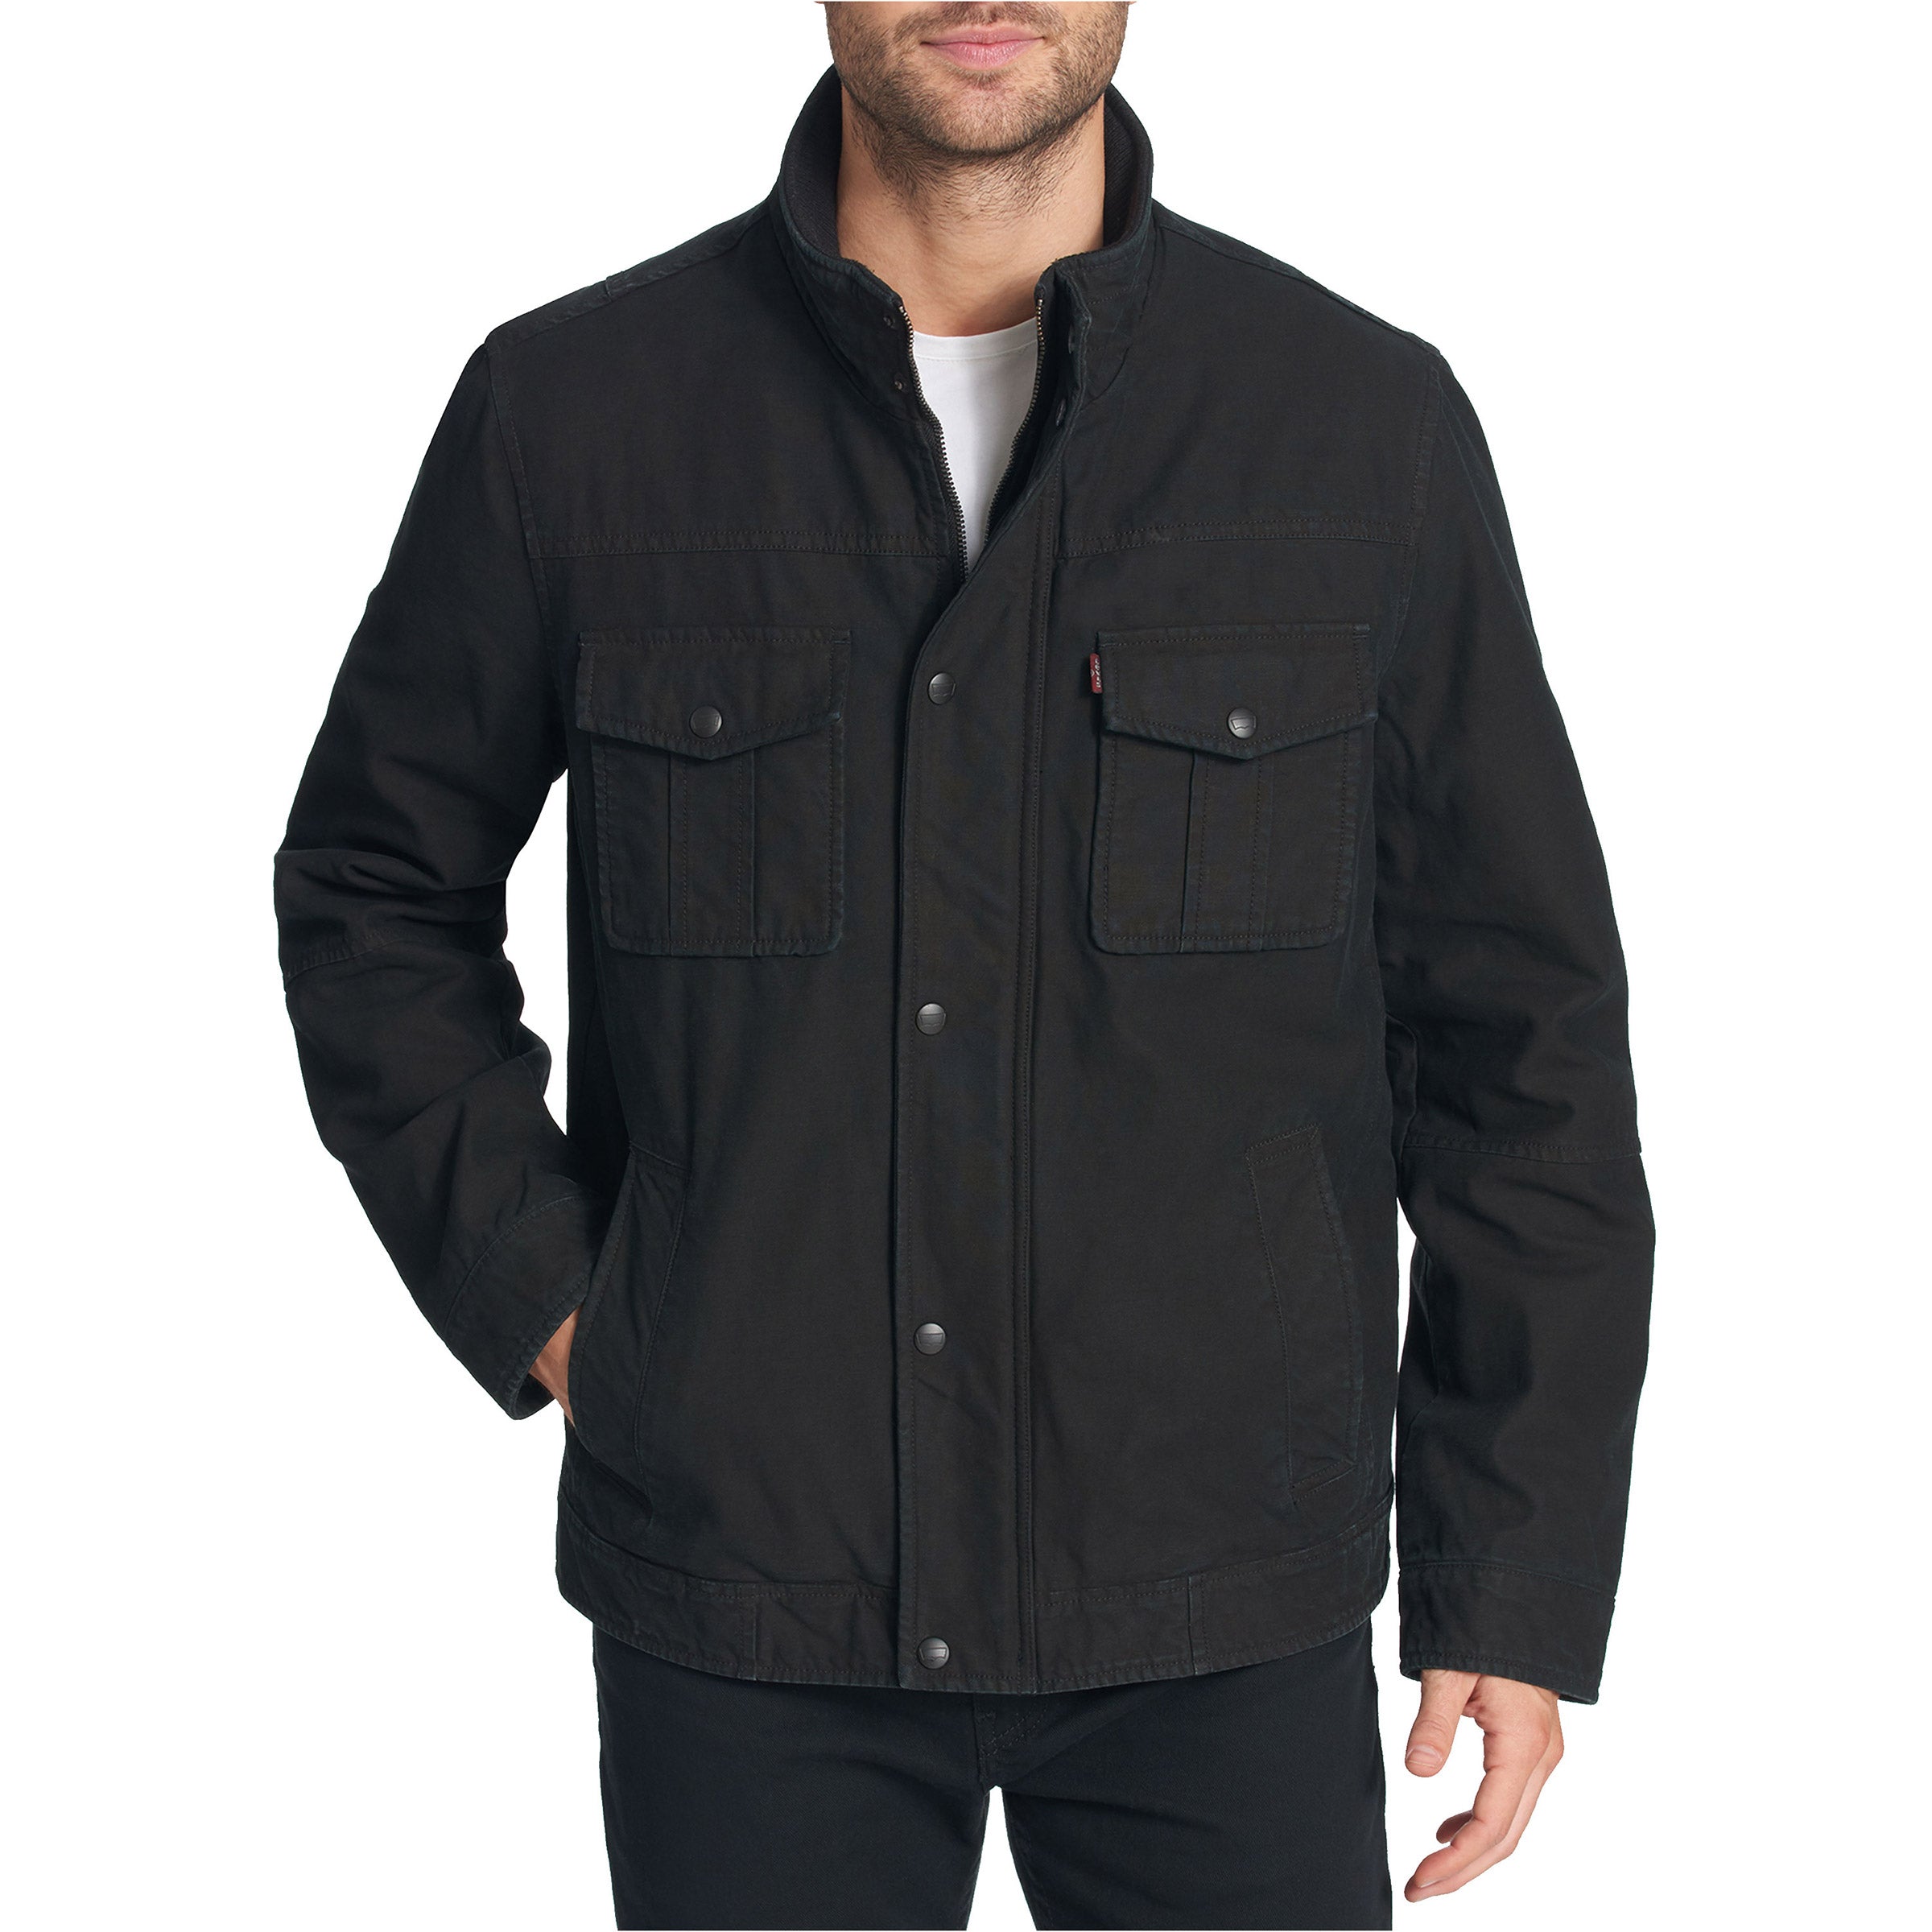 Outerwear & Jackets for Men